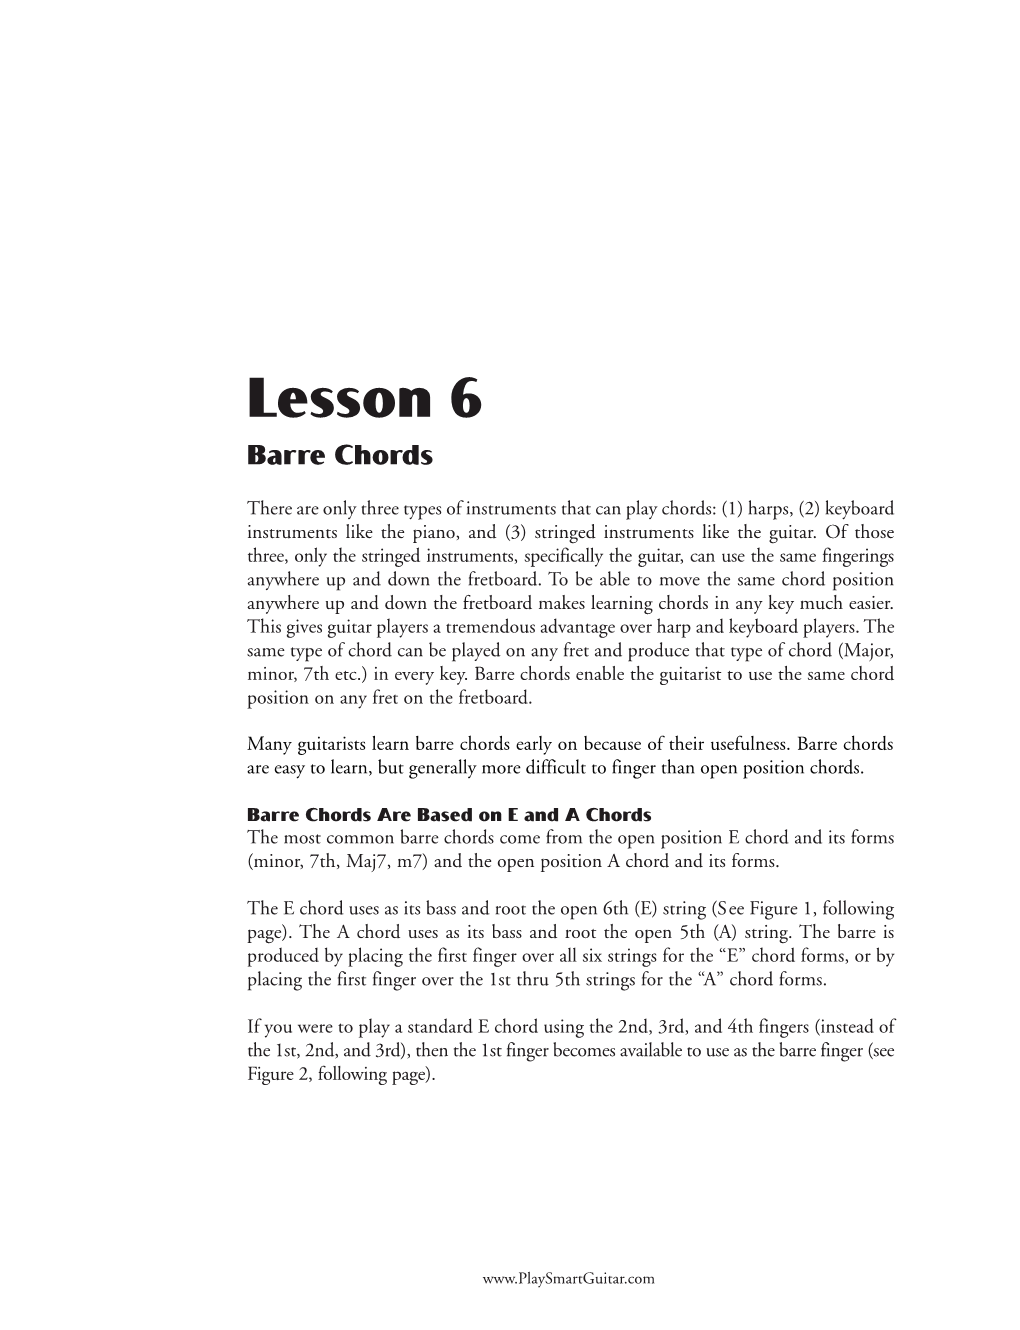 Lesson 6 Barre Chords